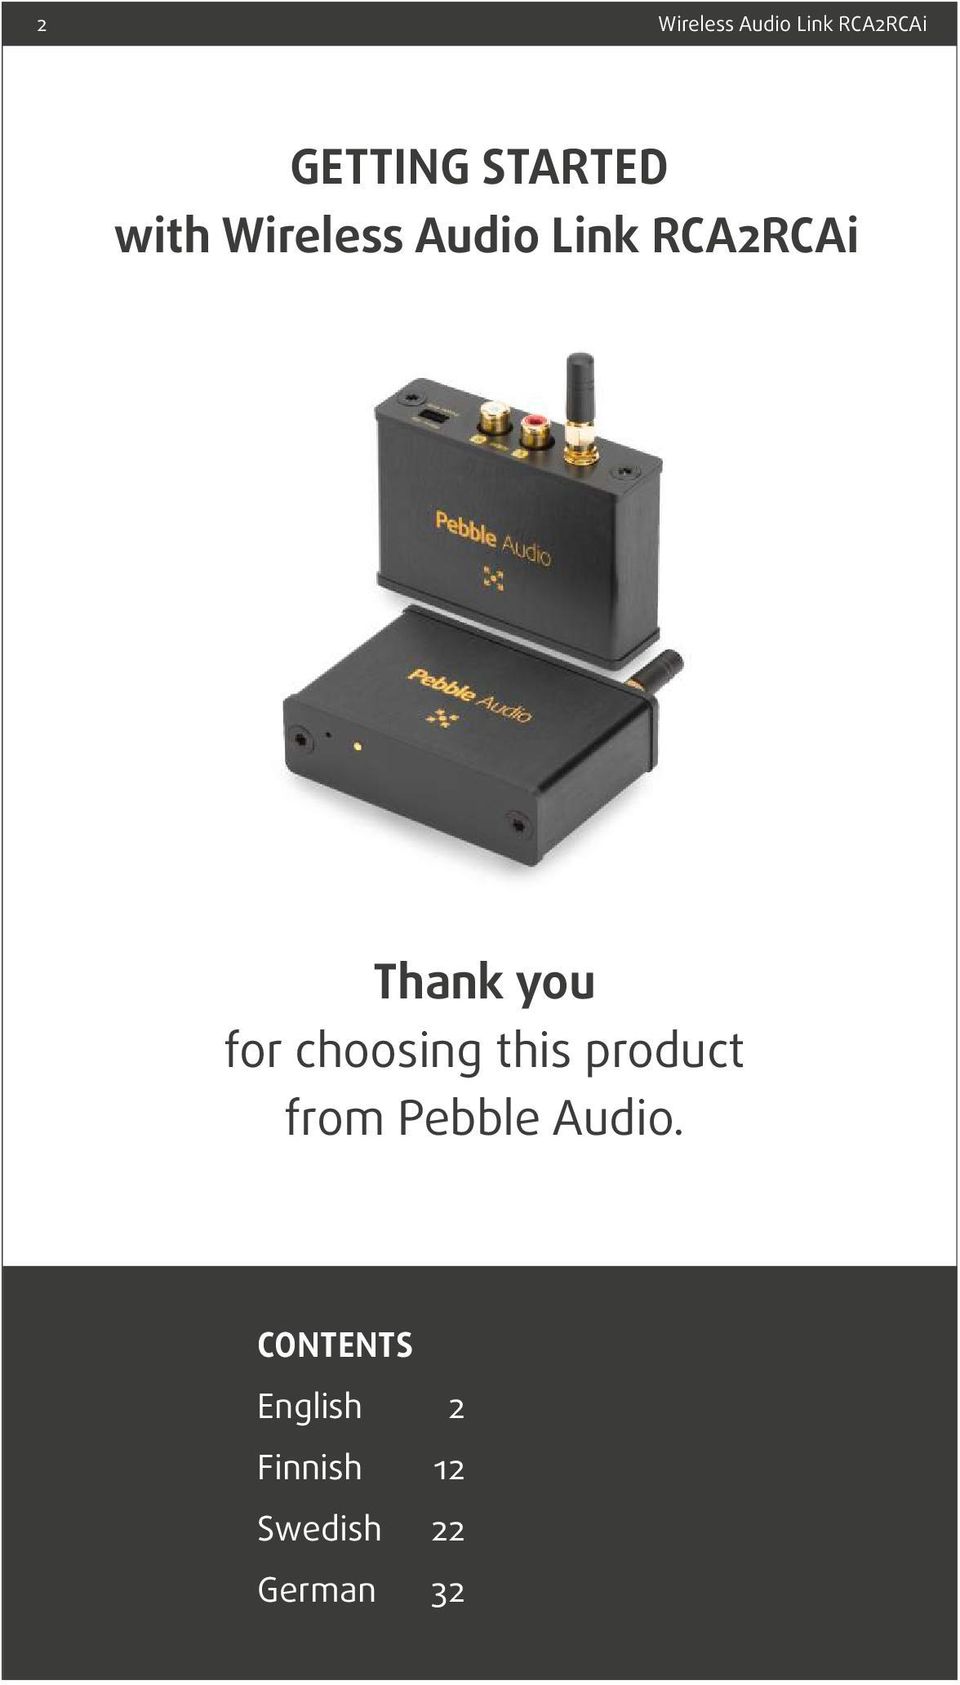 for choosing this product from Pebble Audio.